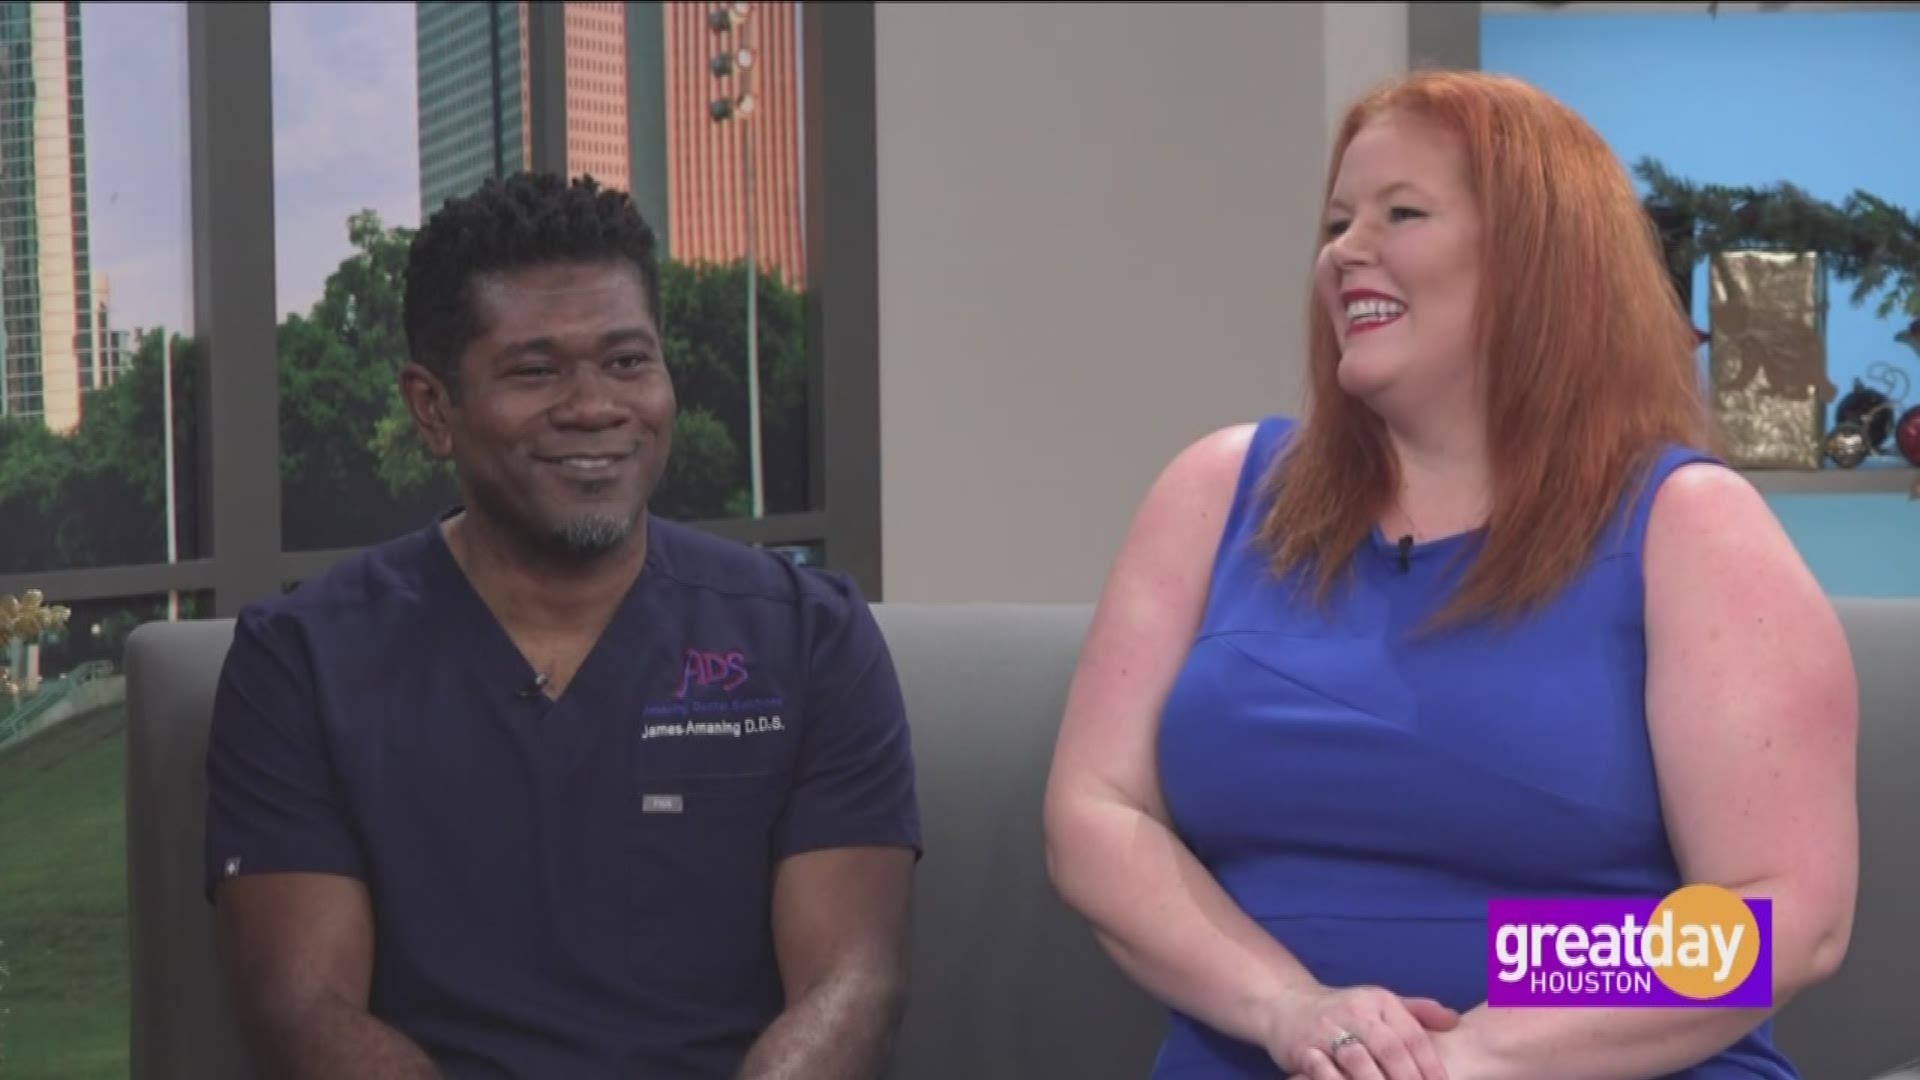 Dr. James Amaning puts a new smile on his patient, Catherine. Hear how Amazing Dental Solutions turned her frown upside down with full mouth rehabilitation.